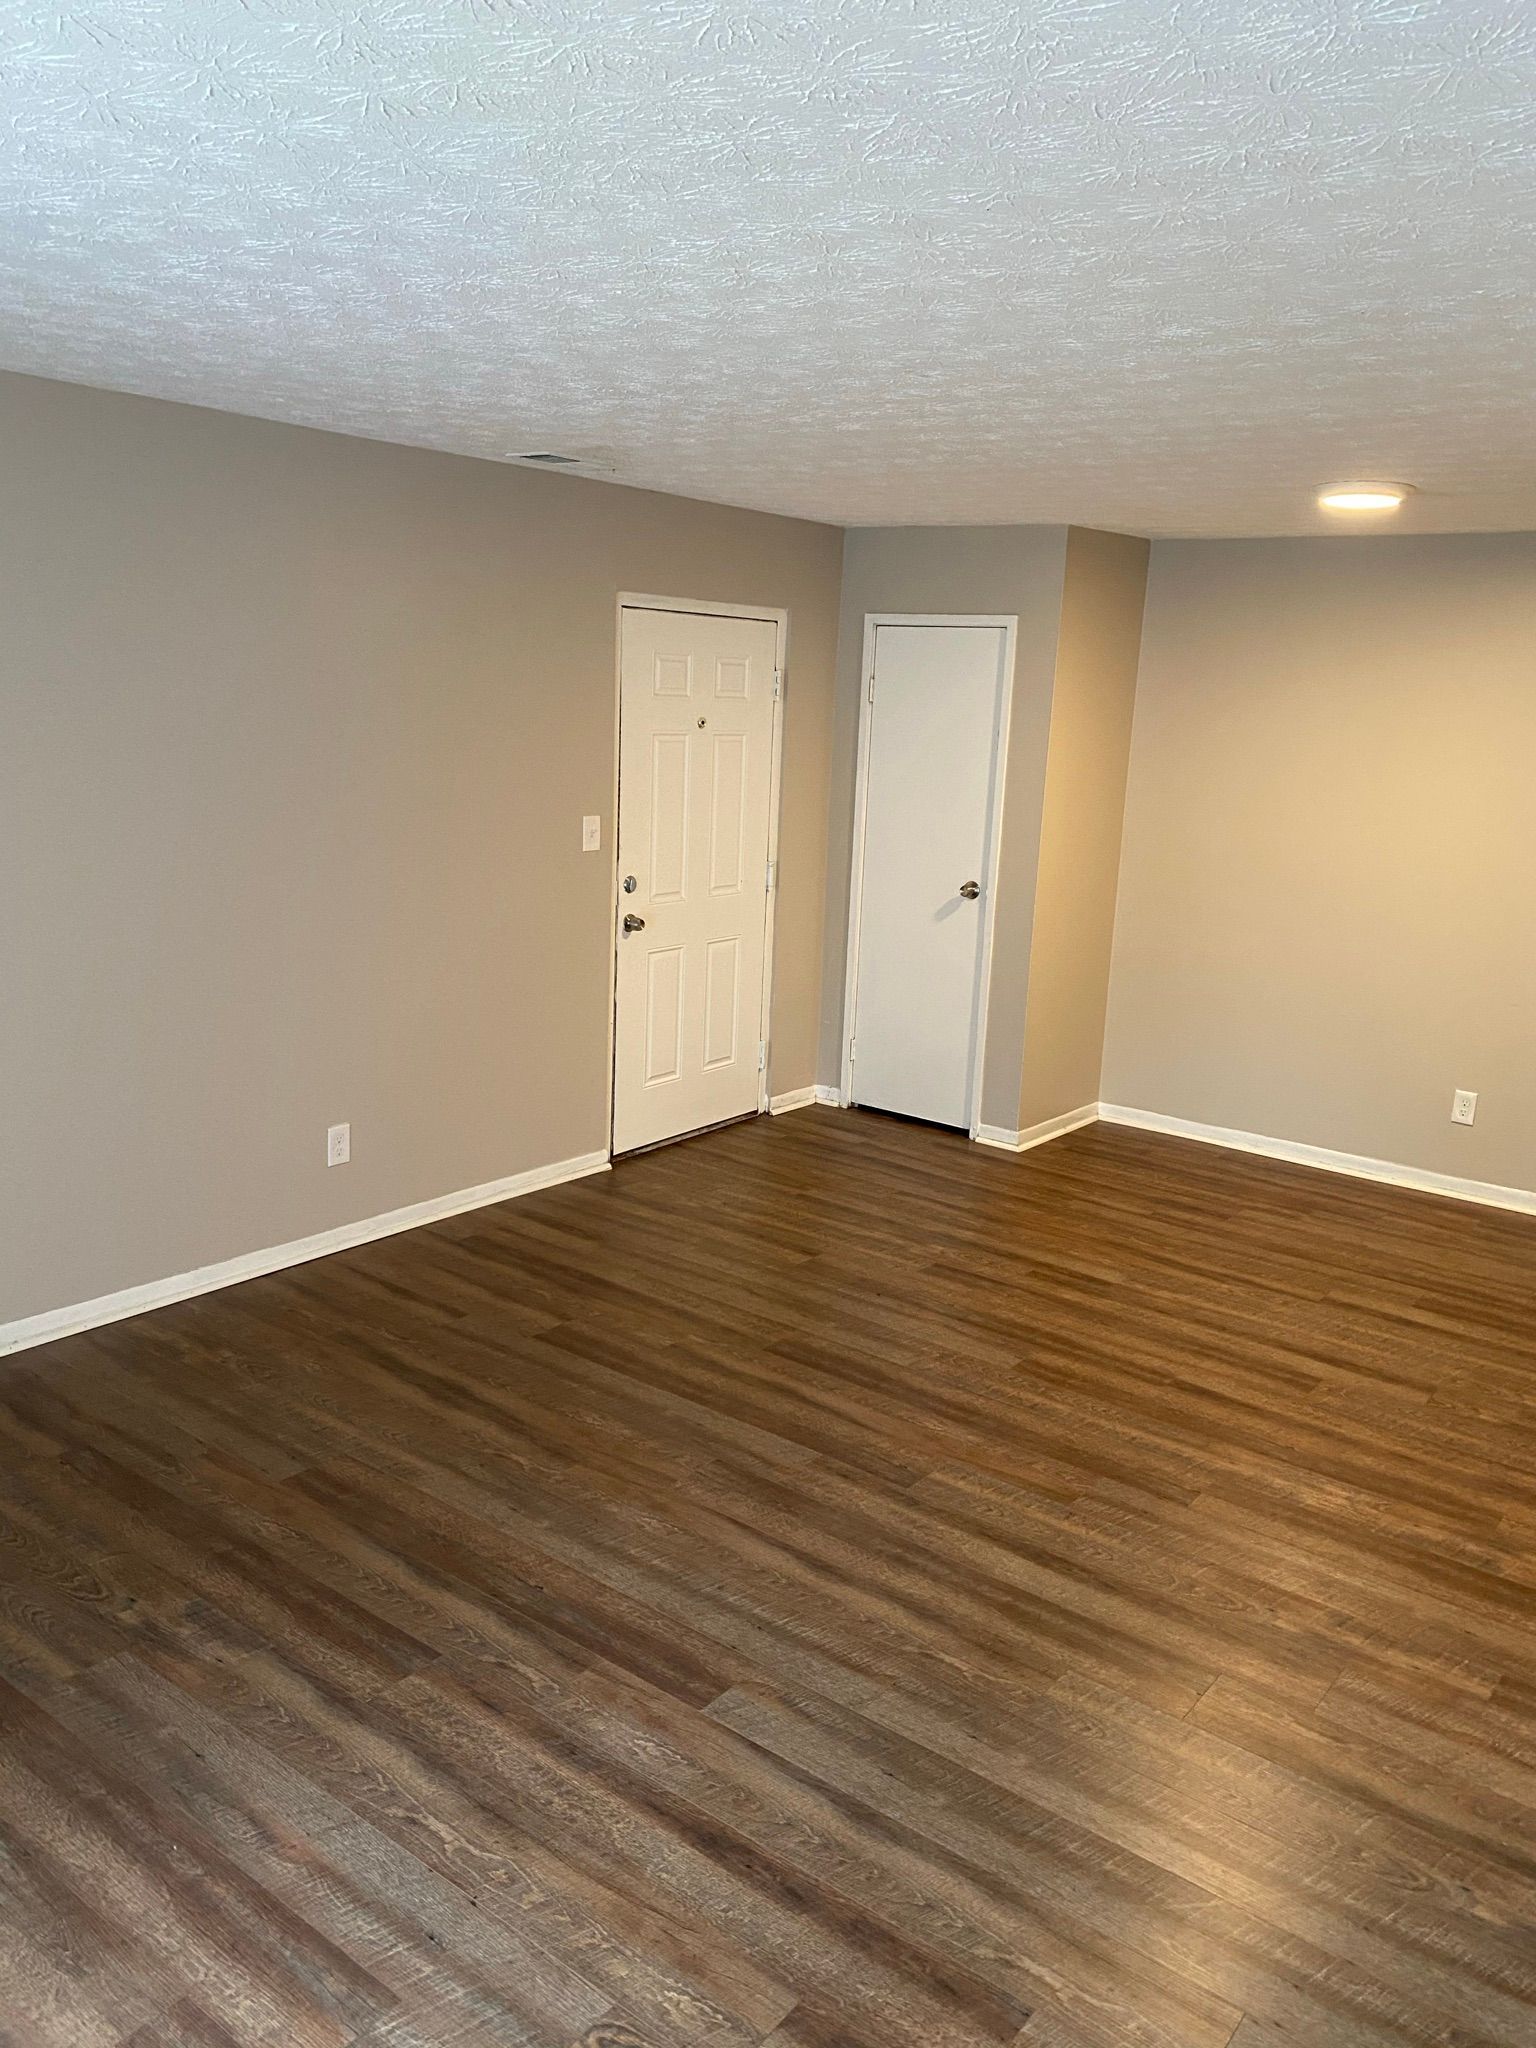 Yearling Court Apartments - Living room with hardwood floor